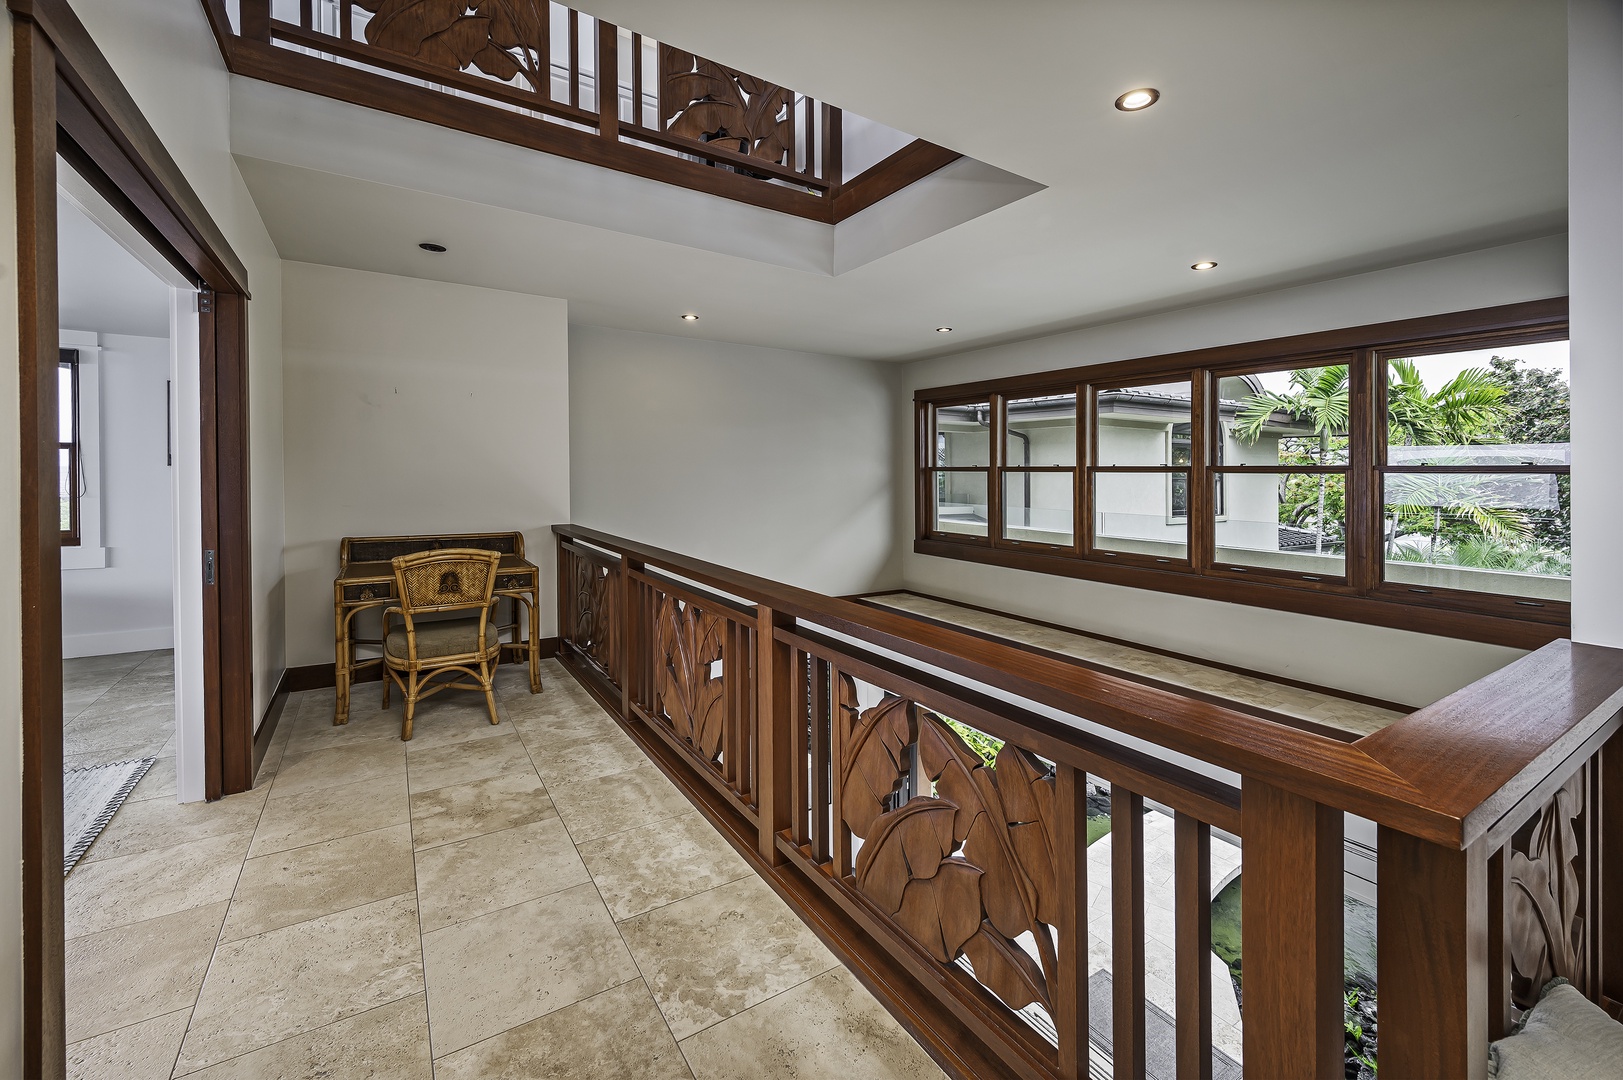 Kailua Kona Vacation Rentals, Alohi Kai Estate • - The second floor hosts two bedroom en suites that are accessed by the grand spiral staircase